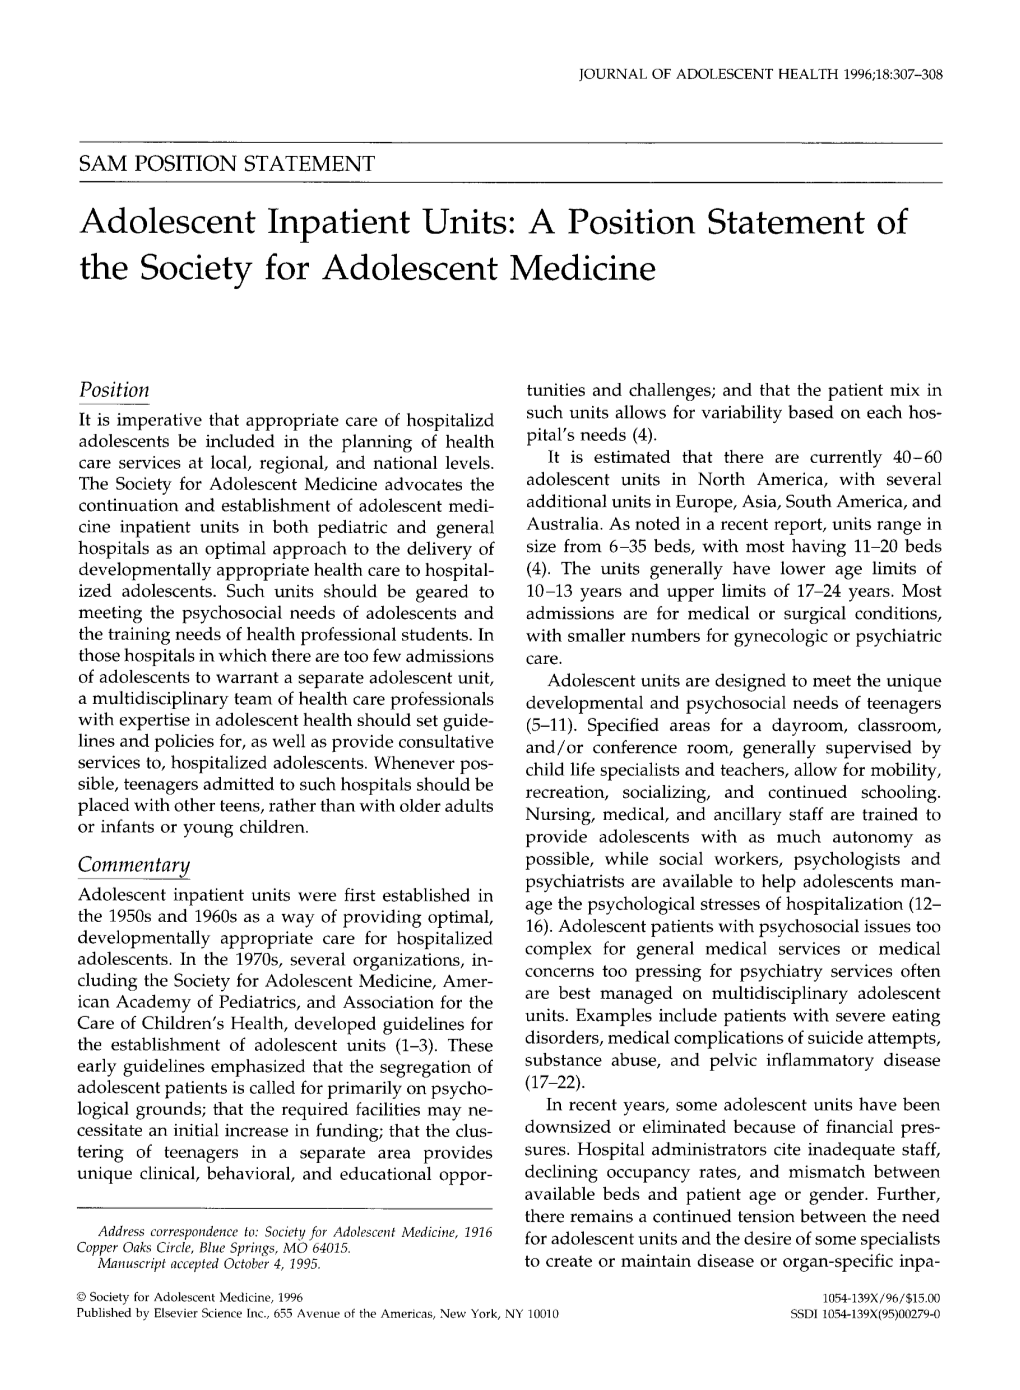 Adolescent Inpatient Units: a Position Statement of the Society for Adolescent Medicine